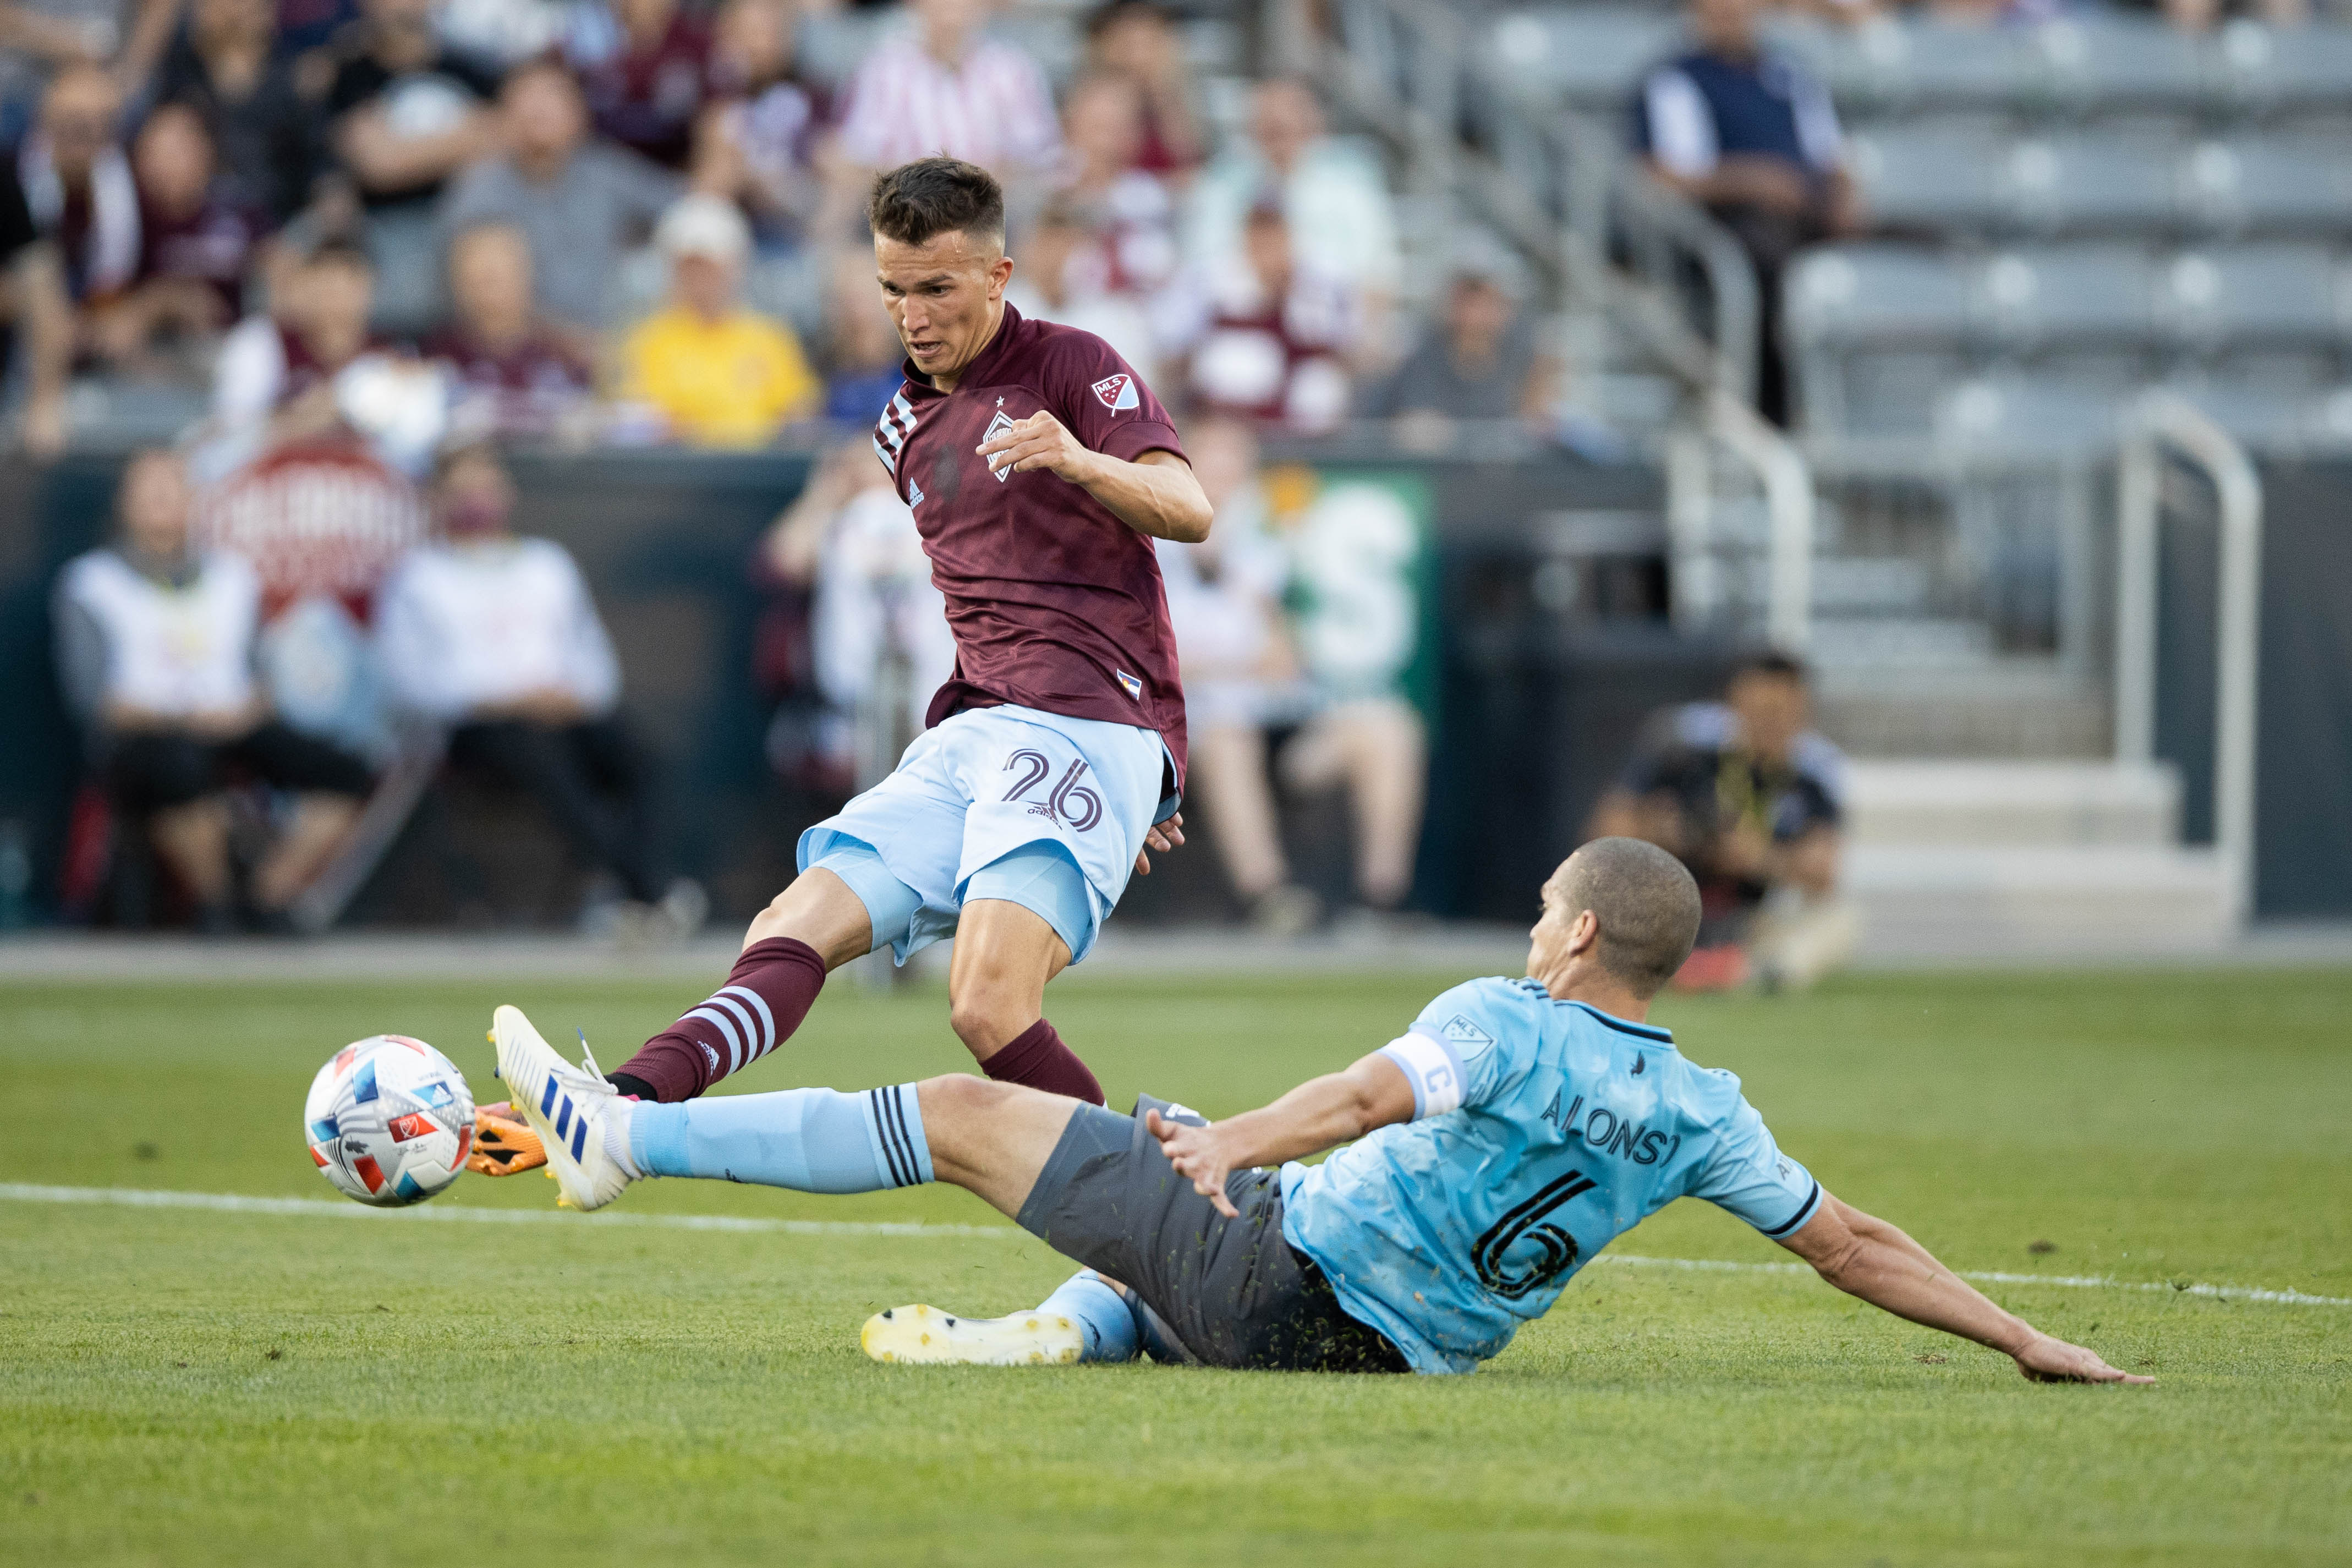 Jul 7, 2021; Commerce City, Colorado, USA; Colorado Rapids midfielder Cole Bassett (26) takes a shot as Minnesota United FC midfielder Osvaldo Alonso (6) defends in the first half at Dick's Sporting Goods Park. Mandatory Credit: Isaiah J. Downing-USA TODAY Sports